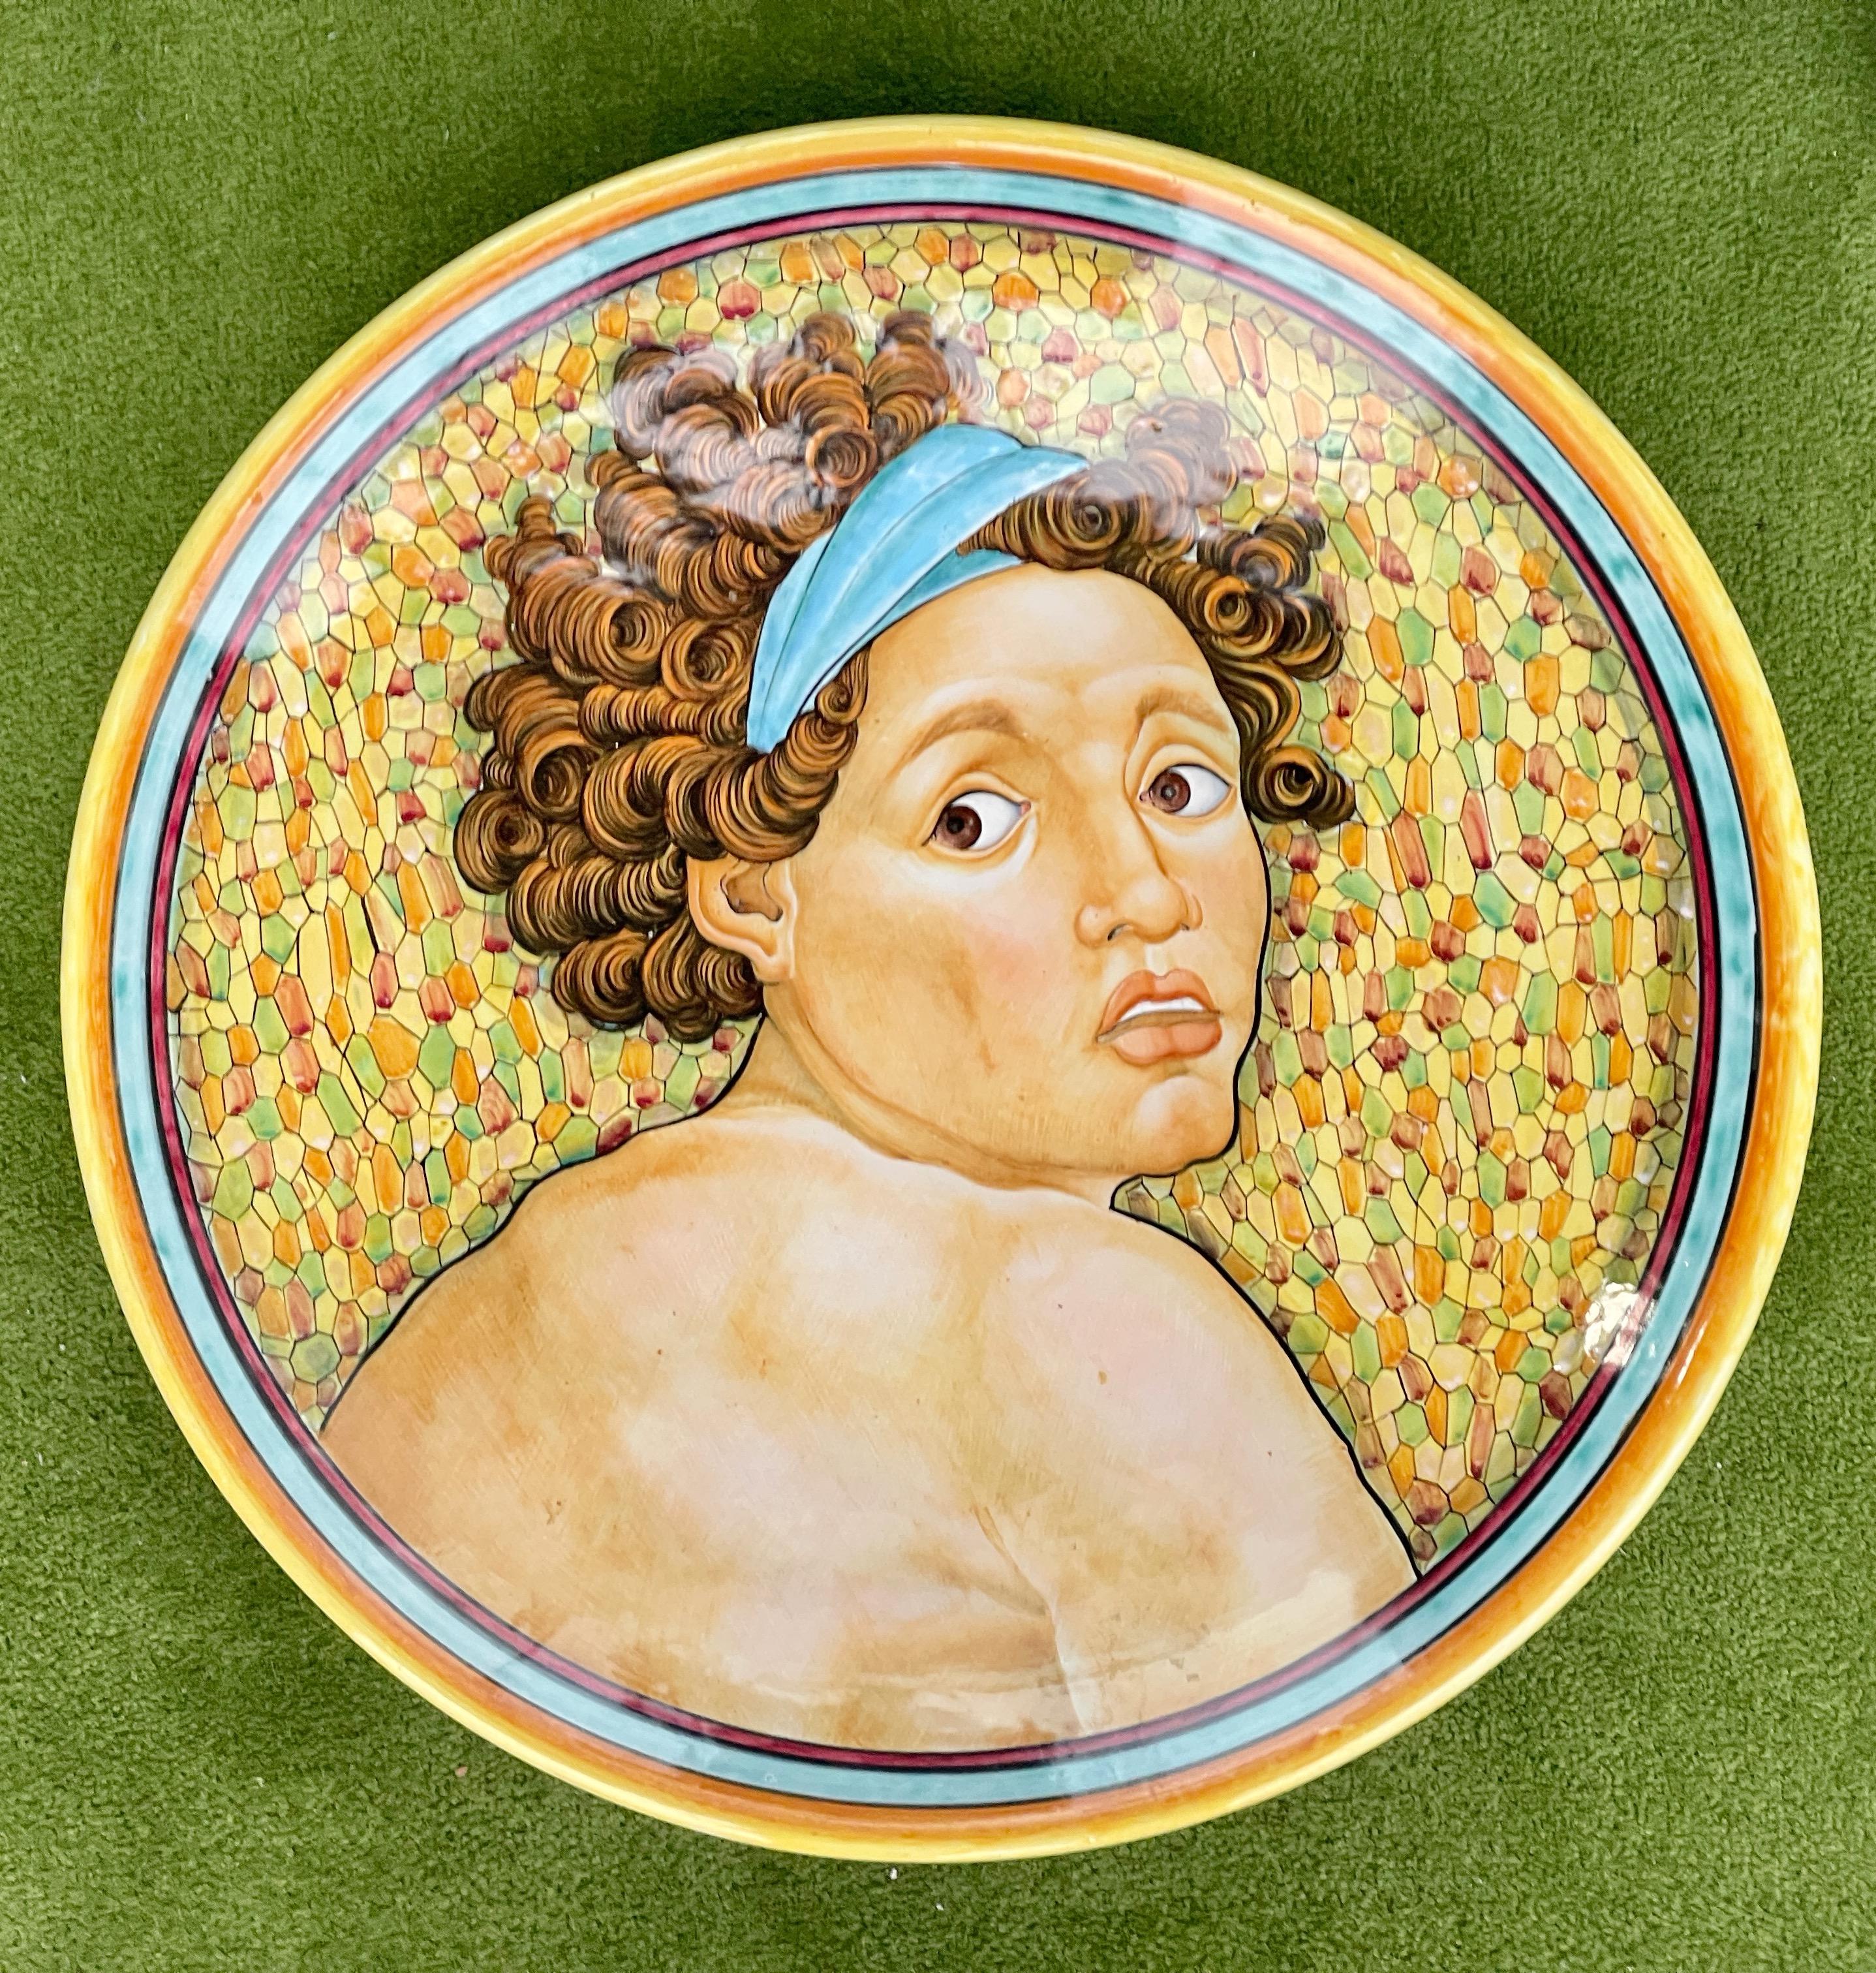 Deruta majolica charger from the workshop of Serafino Volpi hand painted with the wide eyed curly haired head of an 'ignudo' figure wearing headband from Michaelangelo's Sistine Chapel ceiling. On the back it is somewhat illegibly signed by the